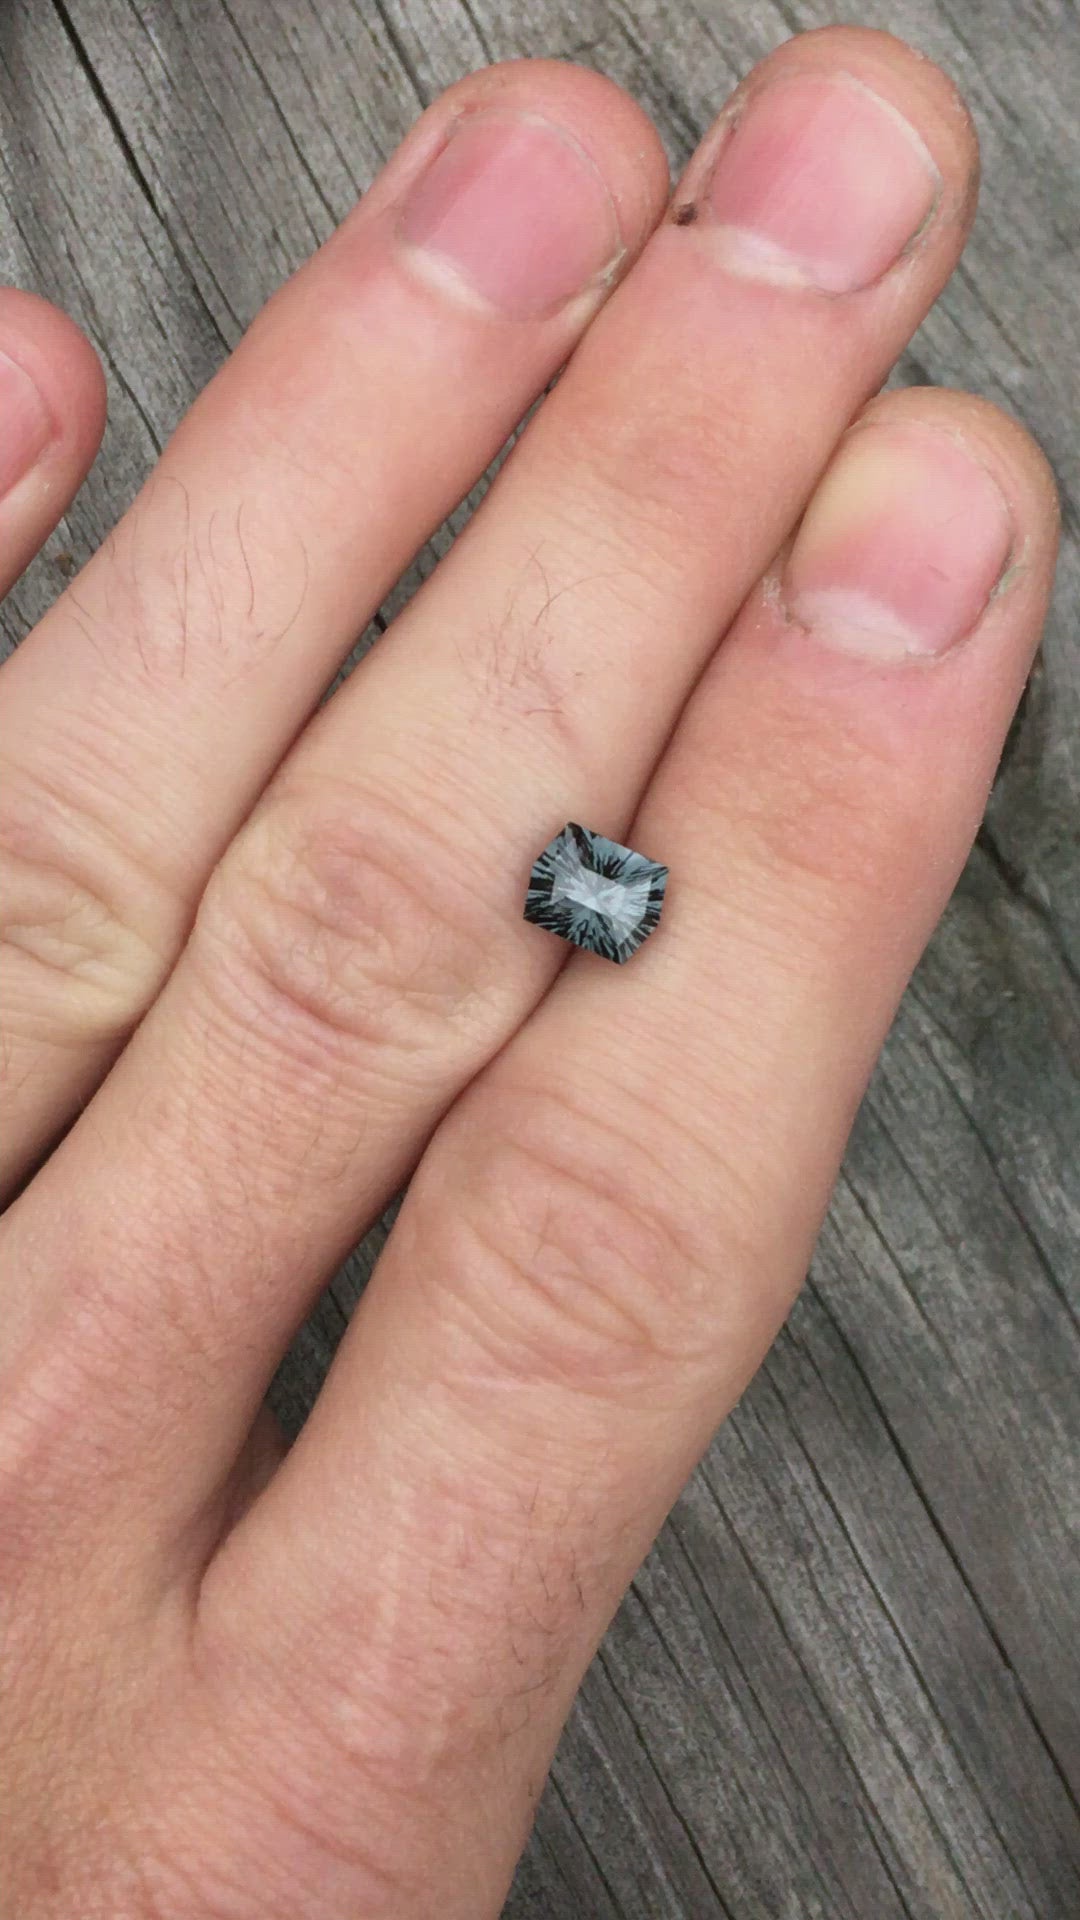 Fantasy Cut Grey Spinel Hexagon, 6x7.8mm, 1.95 carats - Natural Spinel - Steely Grey Spinel Loose Gemstone